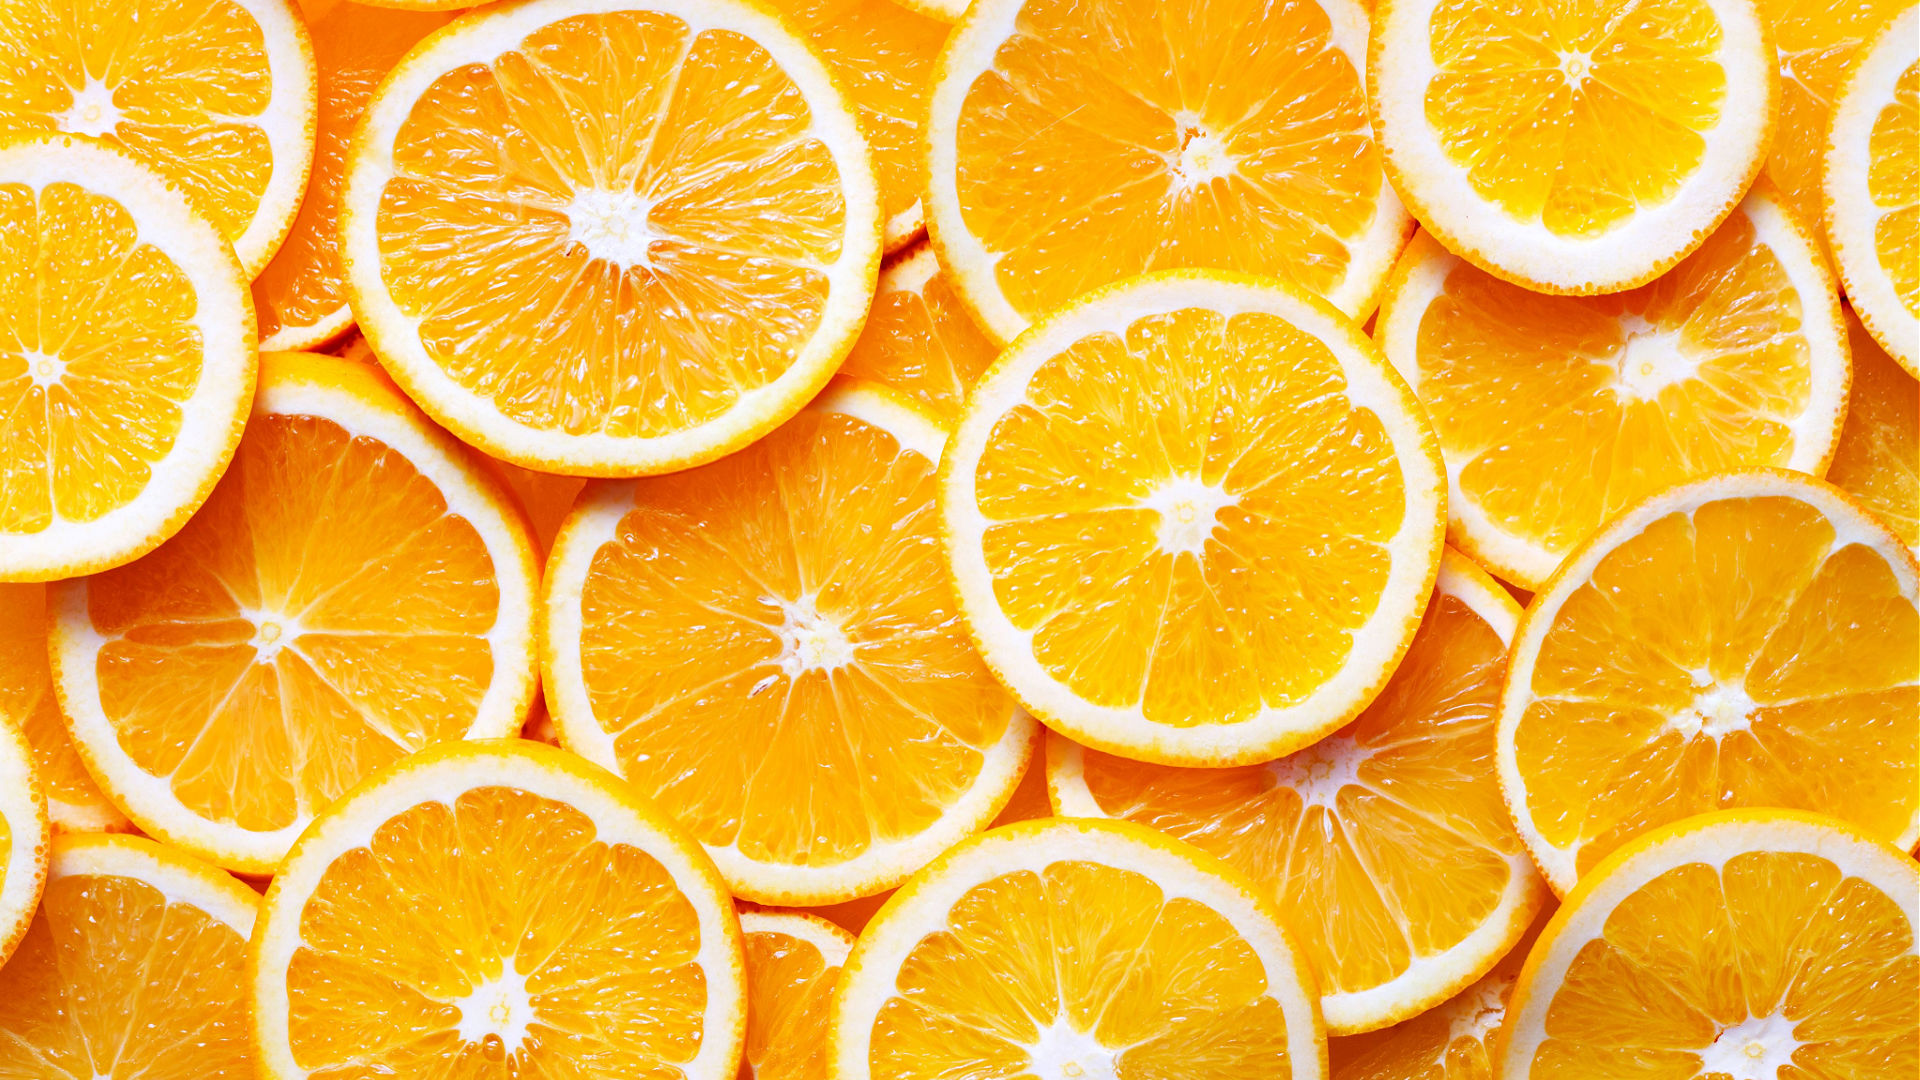 25 Orange Foods And All About Their Benefits - SideChef